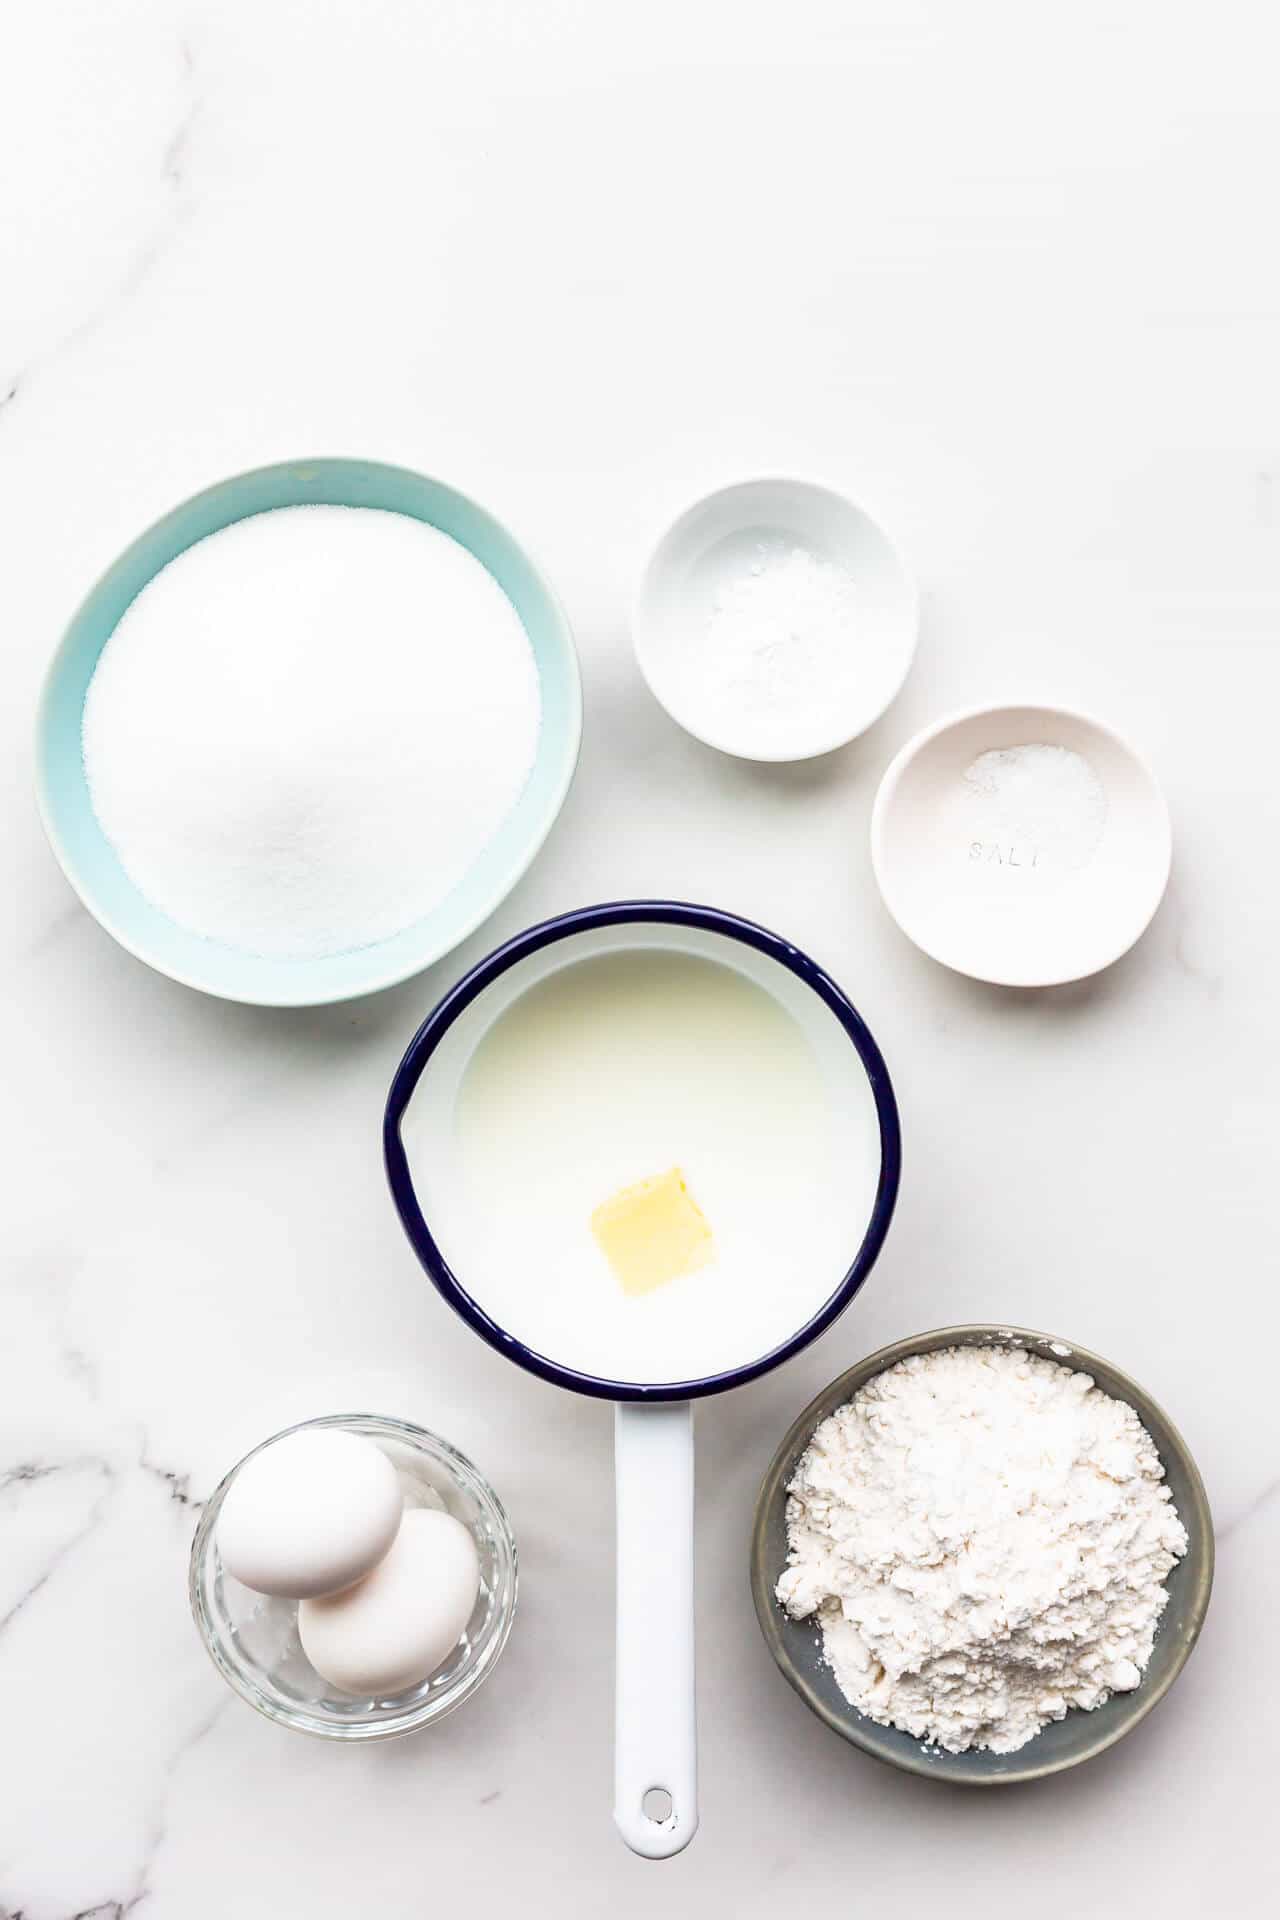 Ingredients to make an easy sponge cake called the hot milk sponge cake, measured out, including flour, eggs, sugar, baking powder, salt, and milk with butter in a saucepan.